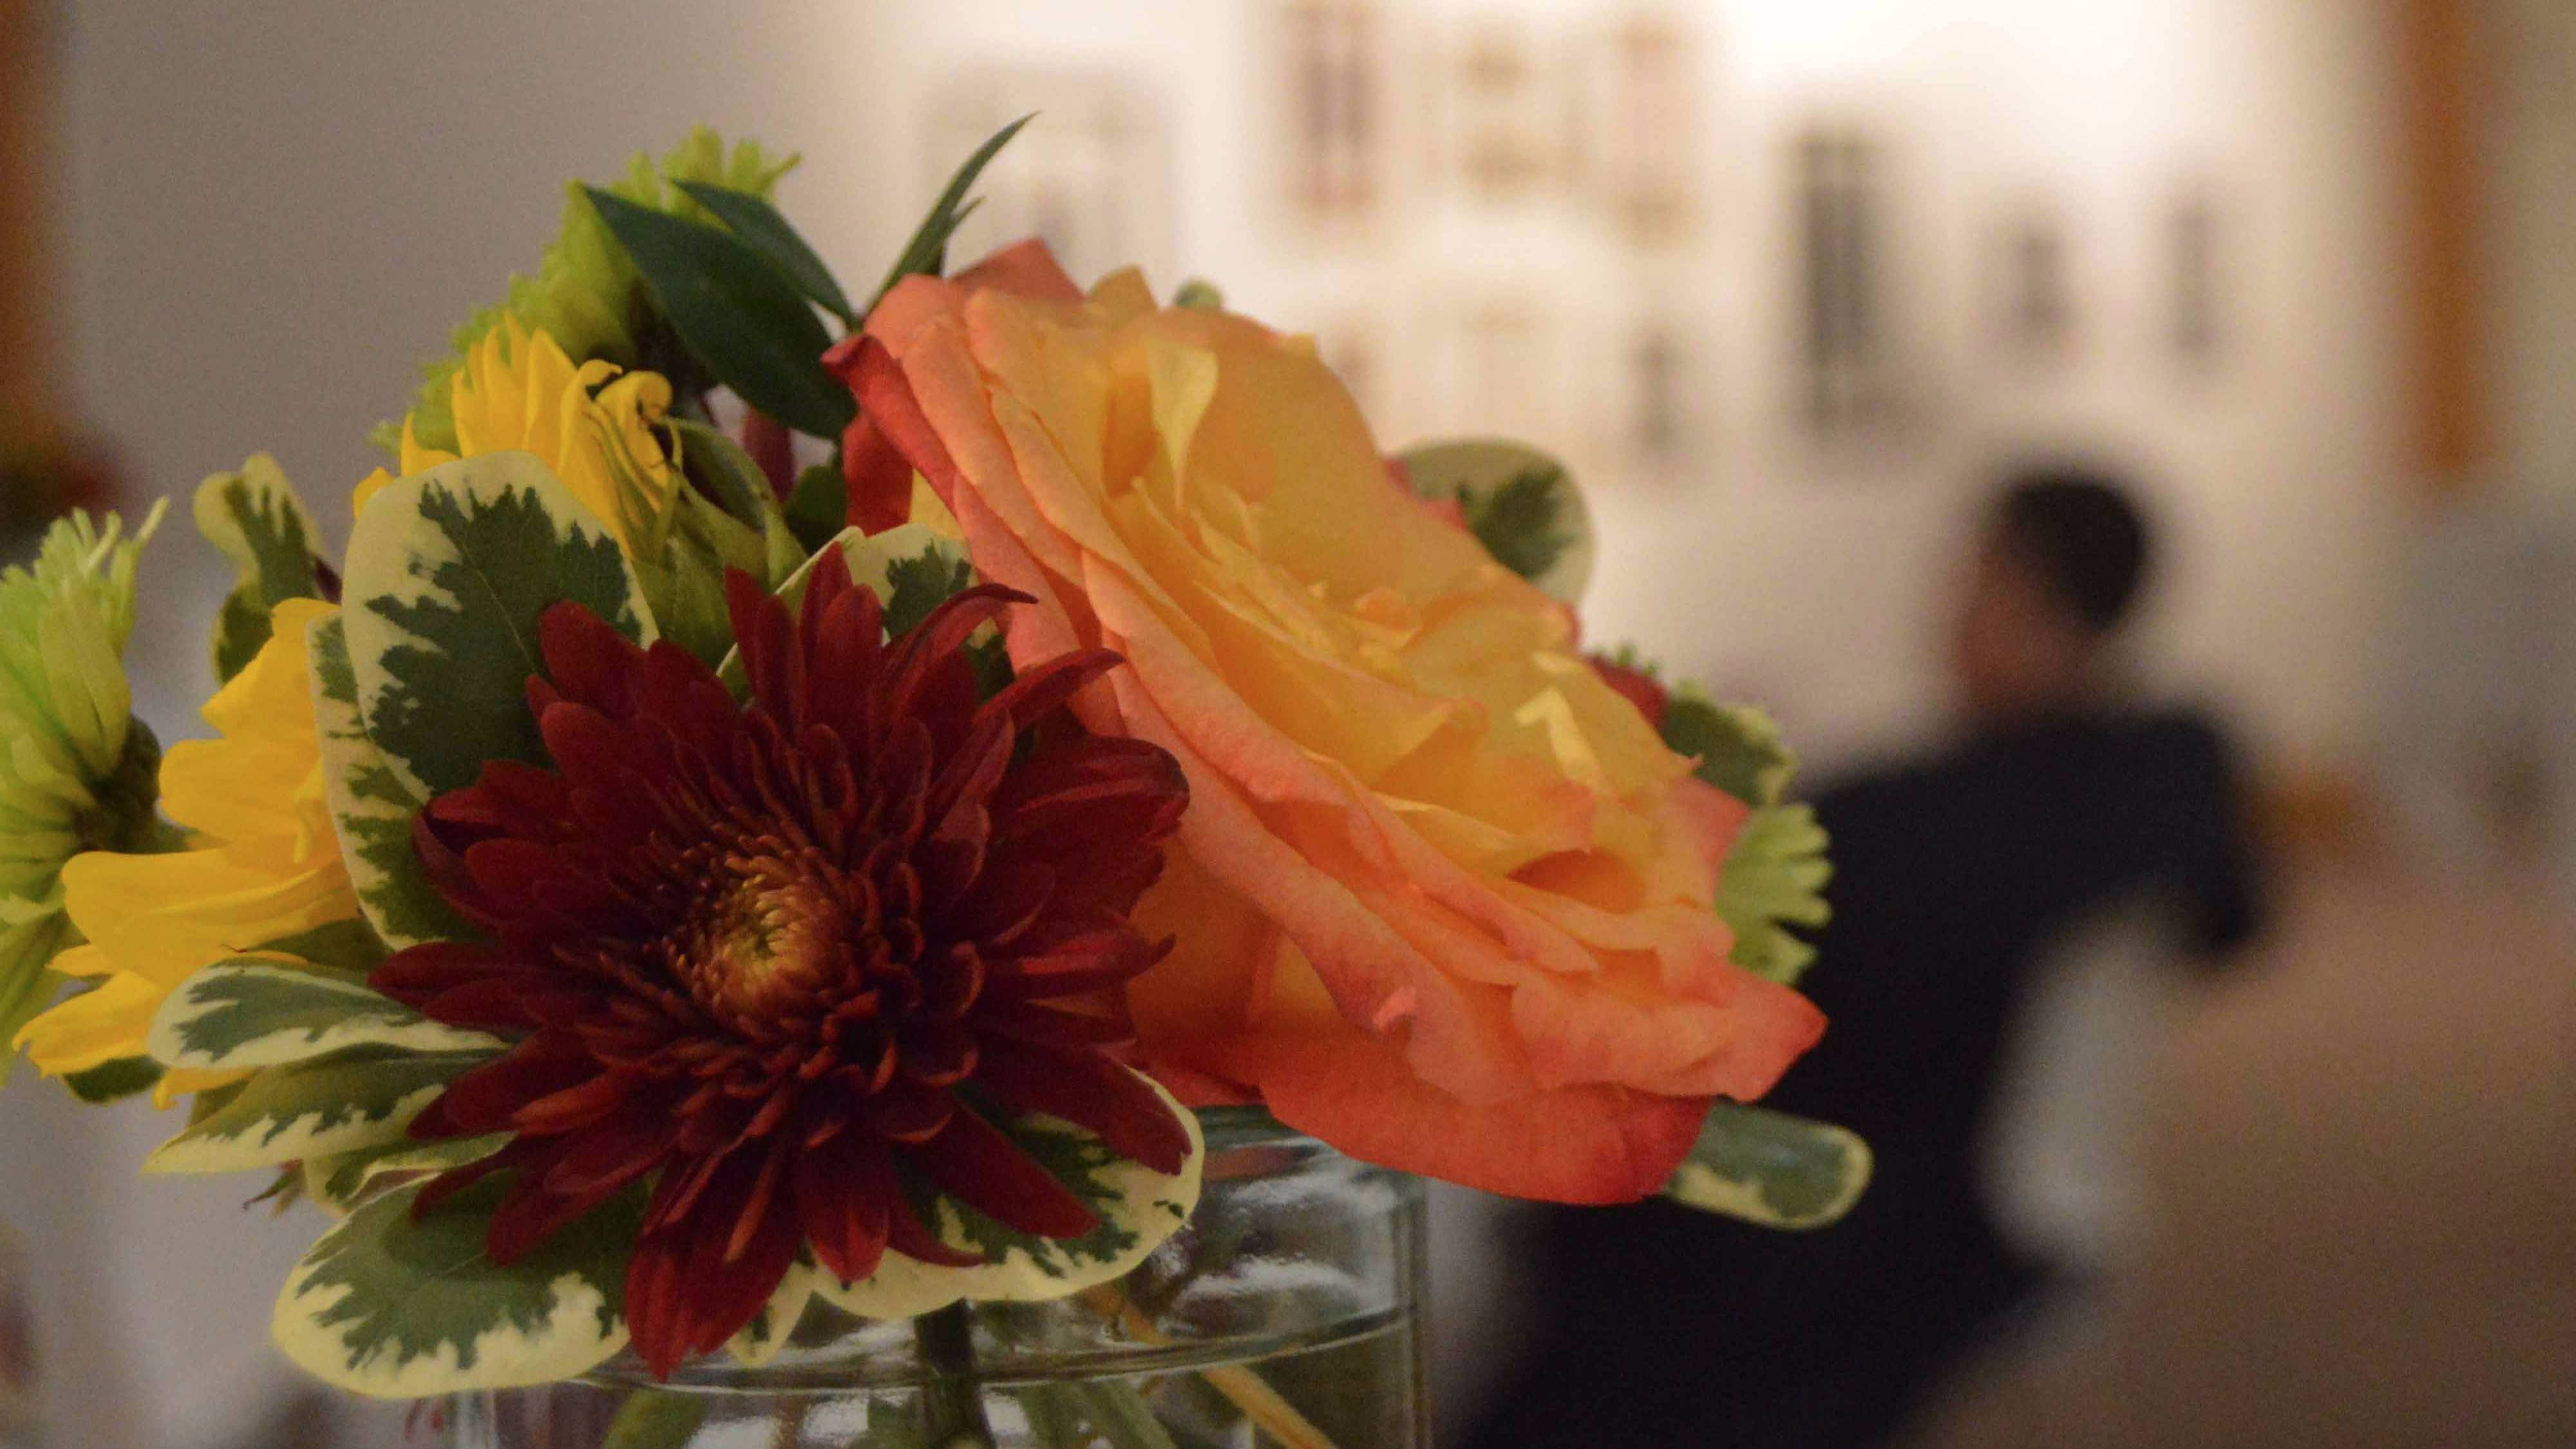 Vase of red, yellow, orange, and green flowers at the Degas Reception.